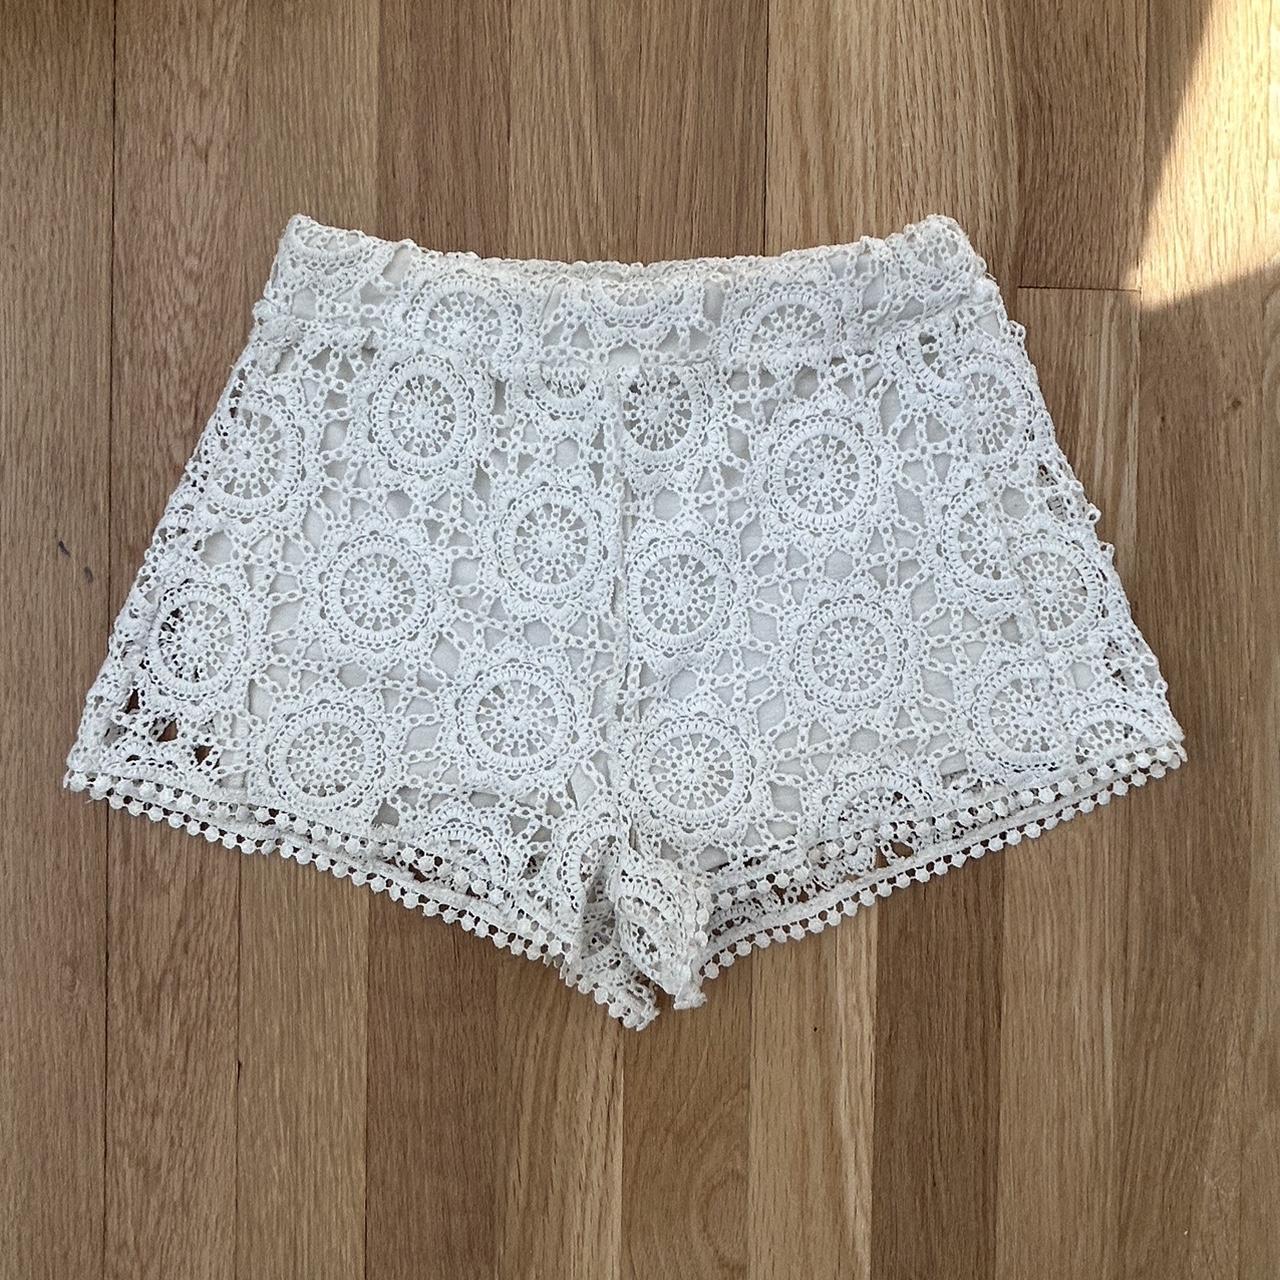 item listed by coconutgirllea